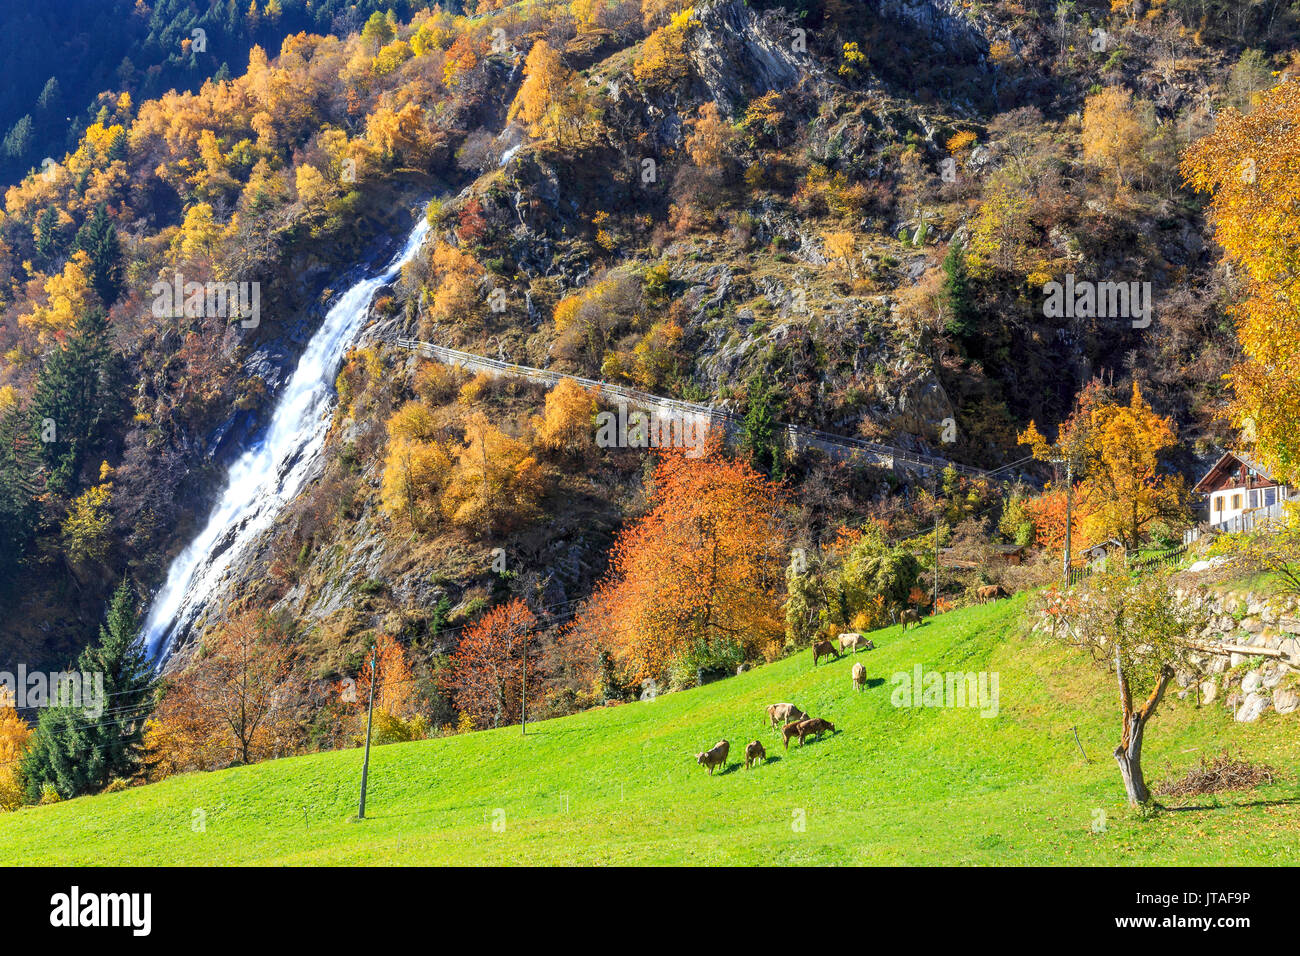 Herd of cows grazing at the foot of the waterfall, Parcines Waterfall, Parcines, Val Venosta, Alto Adige-Sudtirol, Italy, Europe Stock Photo